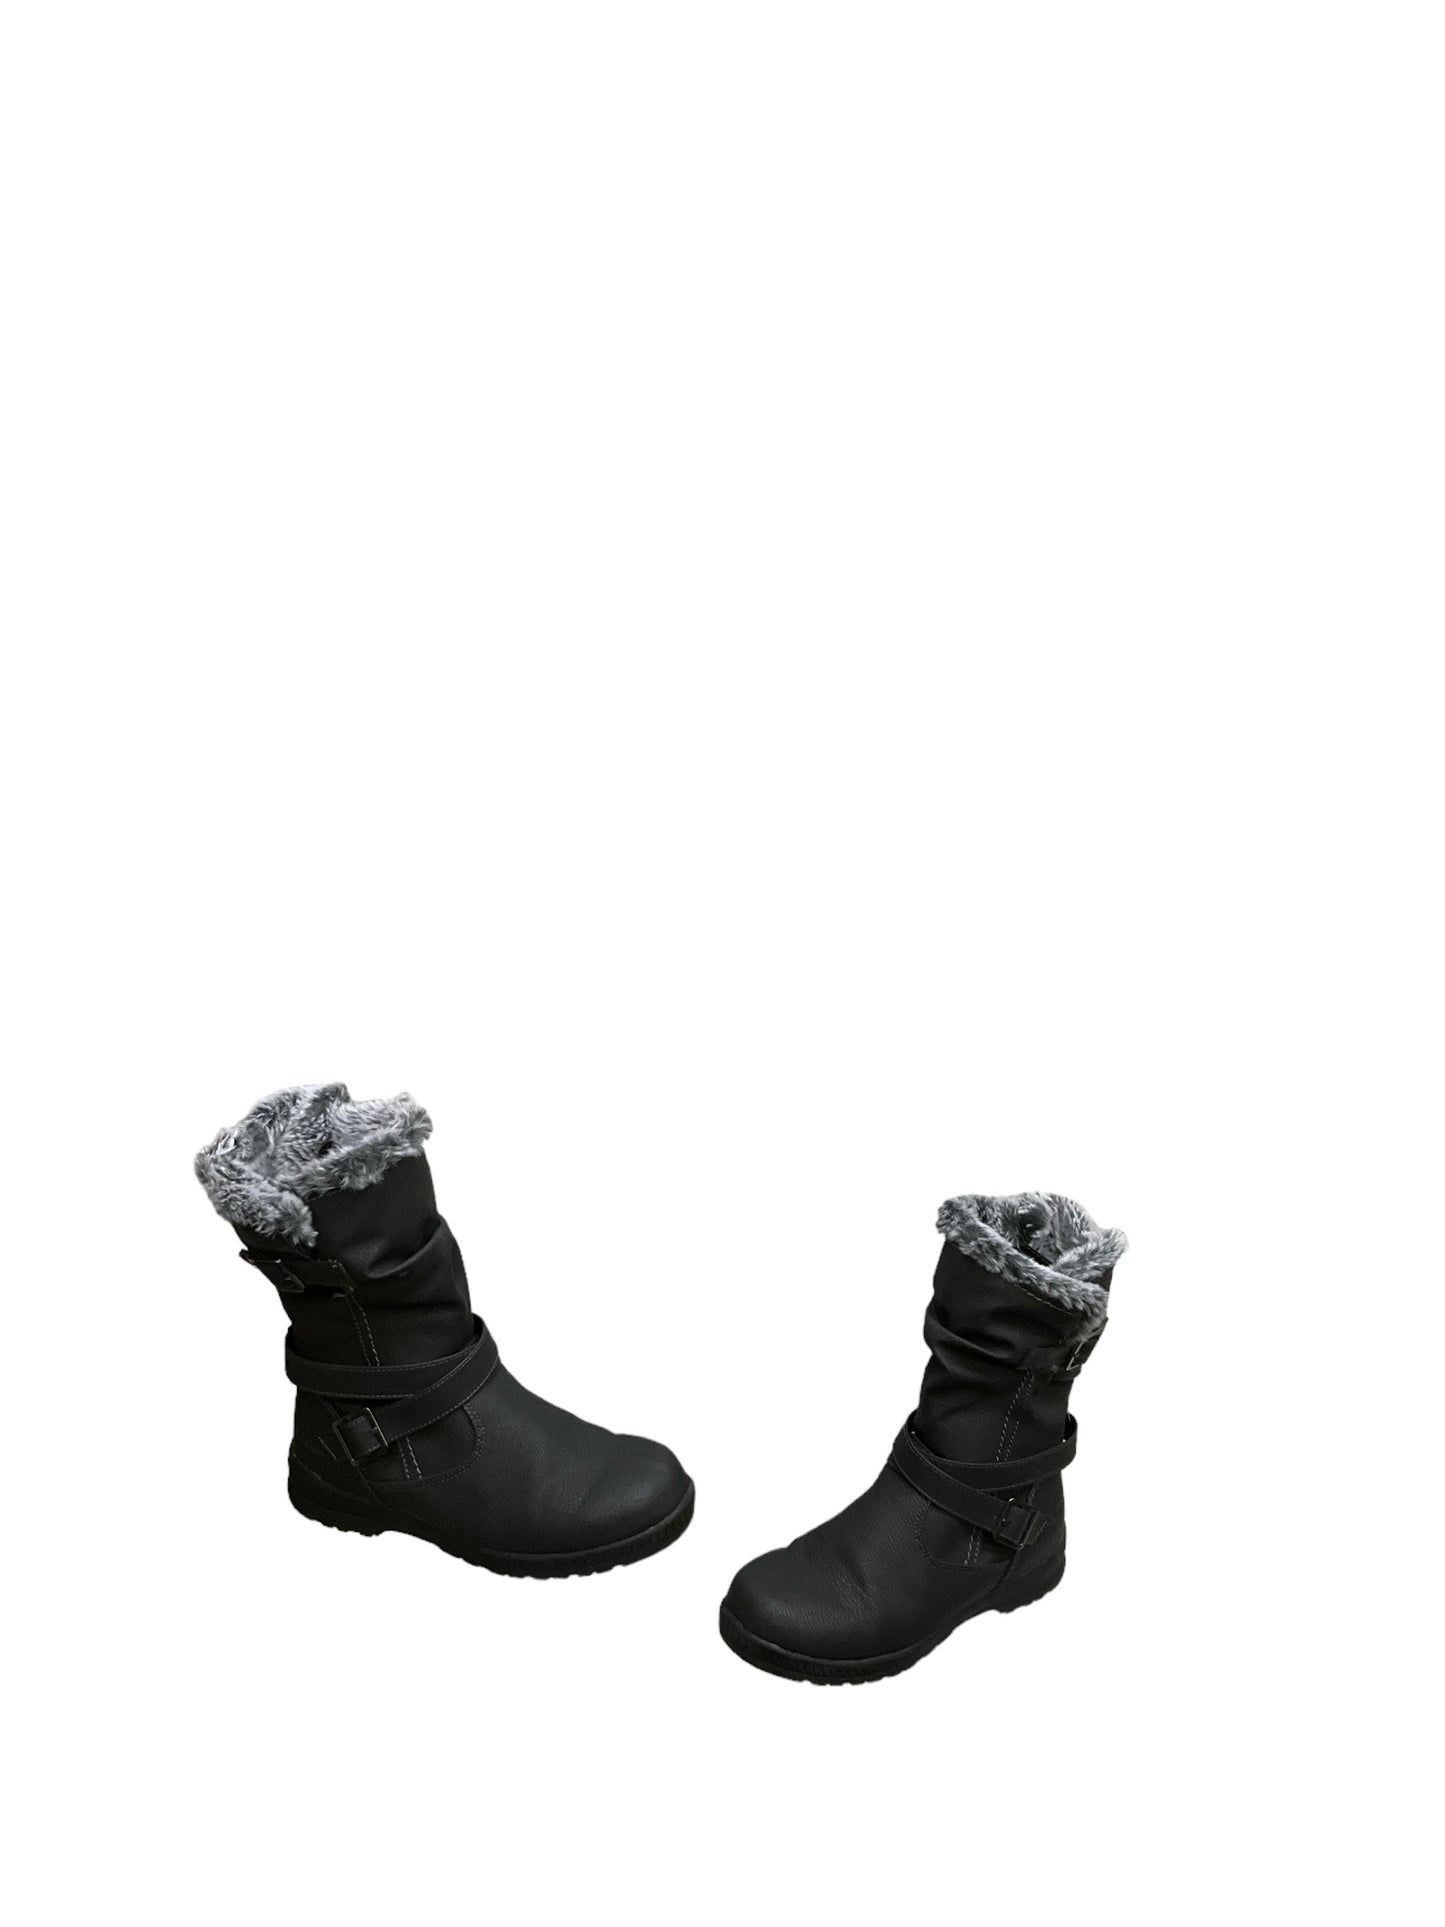 Boots Snow By Sporto  Size: 6